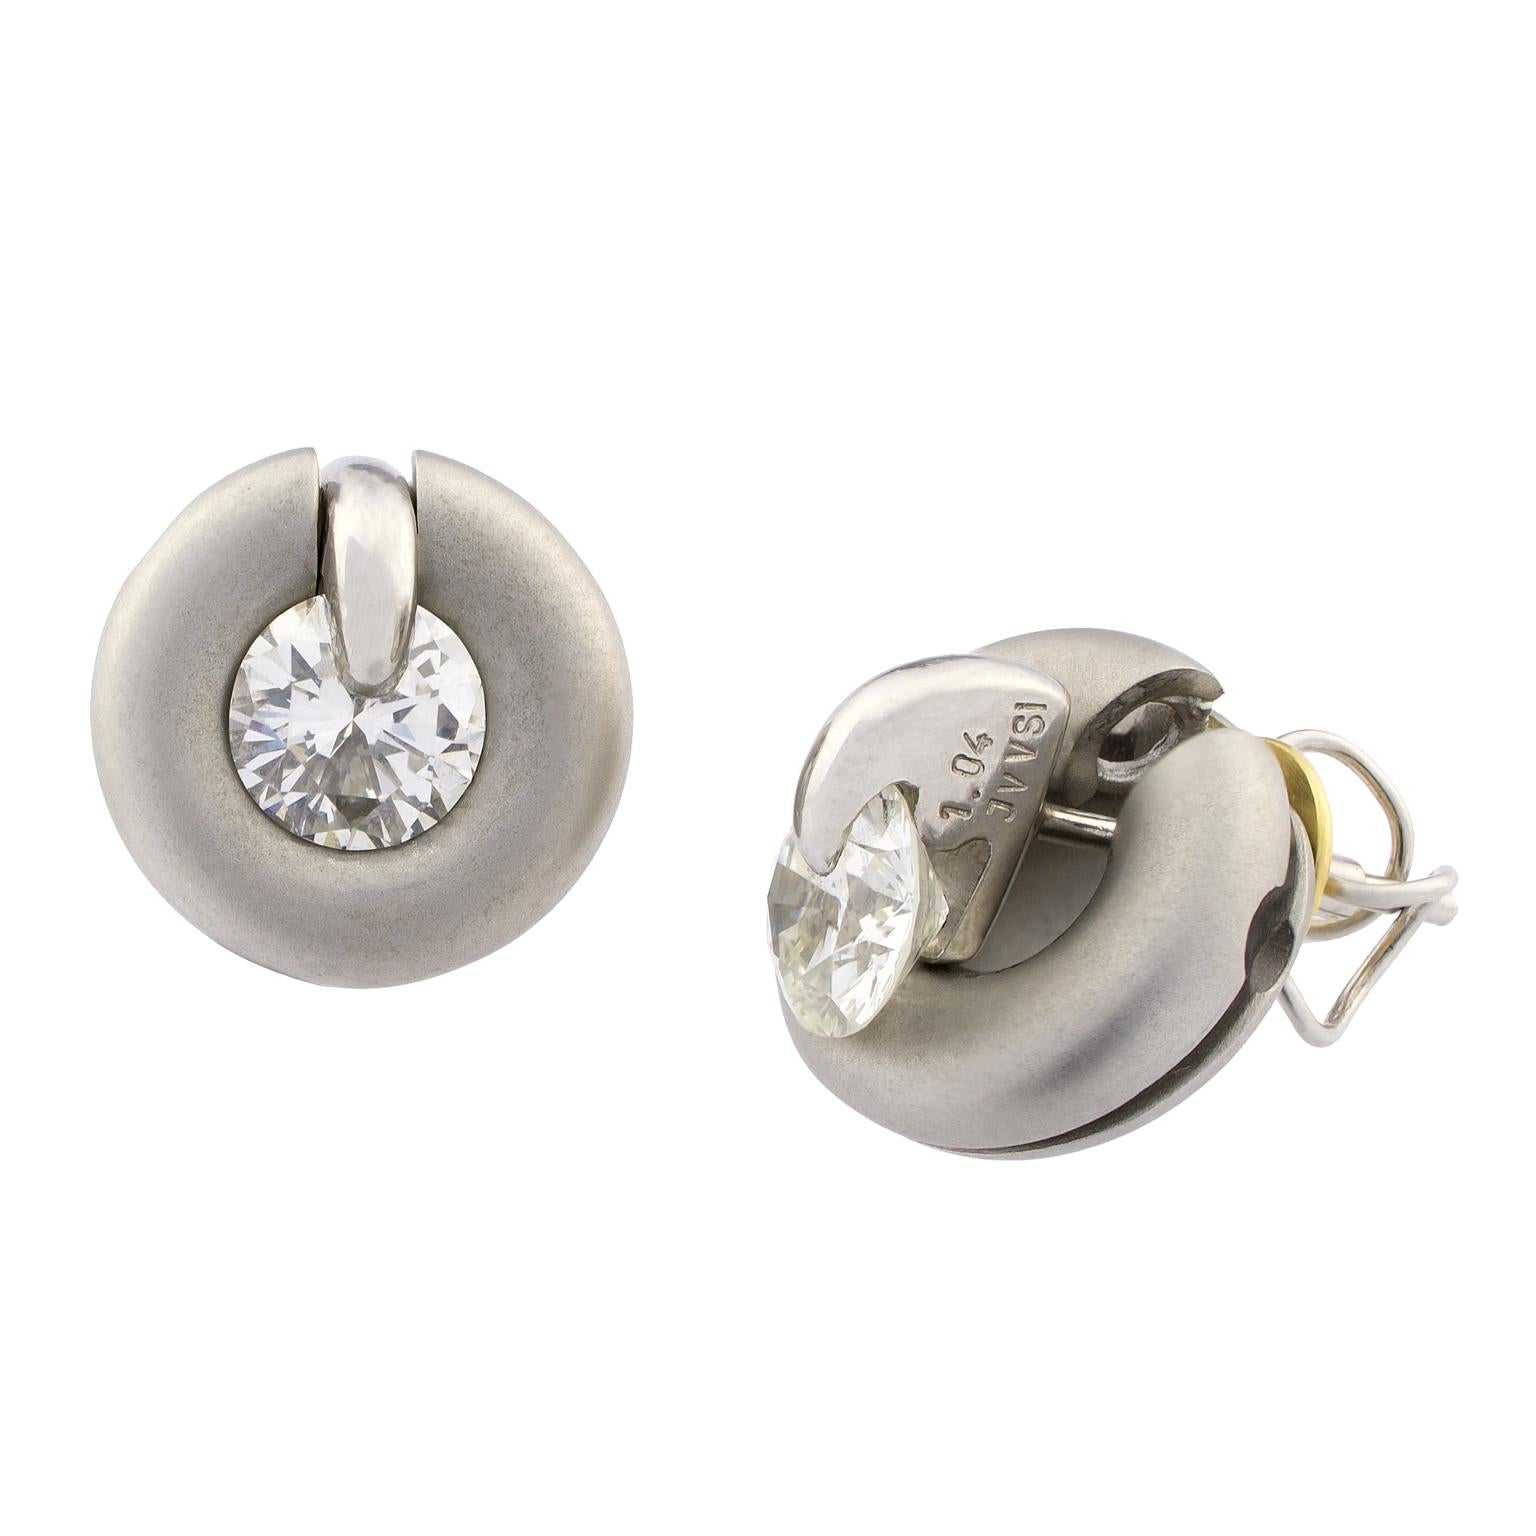 De Beers limited edition Millenium Diamonds stud earrings centered by two diamonds. One of 1.04 carats and characteristics of color J and clarity VVS1, the other of 1.00 carats, color I and clarity VSI. It comes with interchangeable body structures